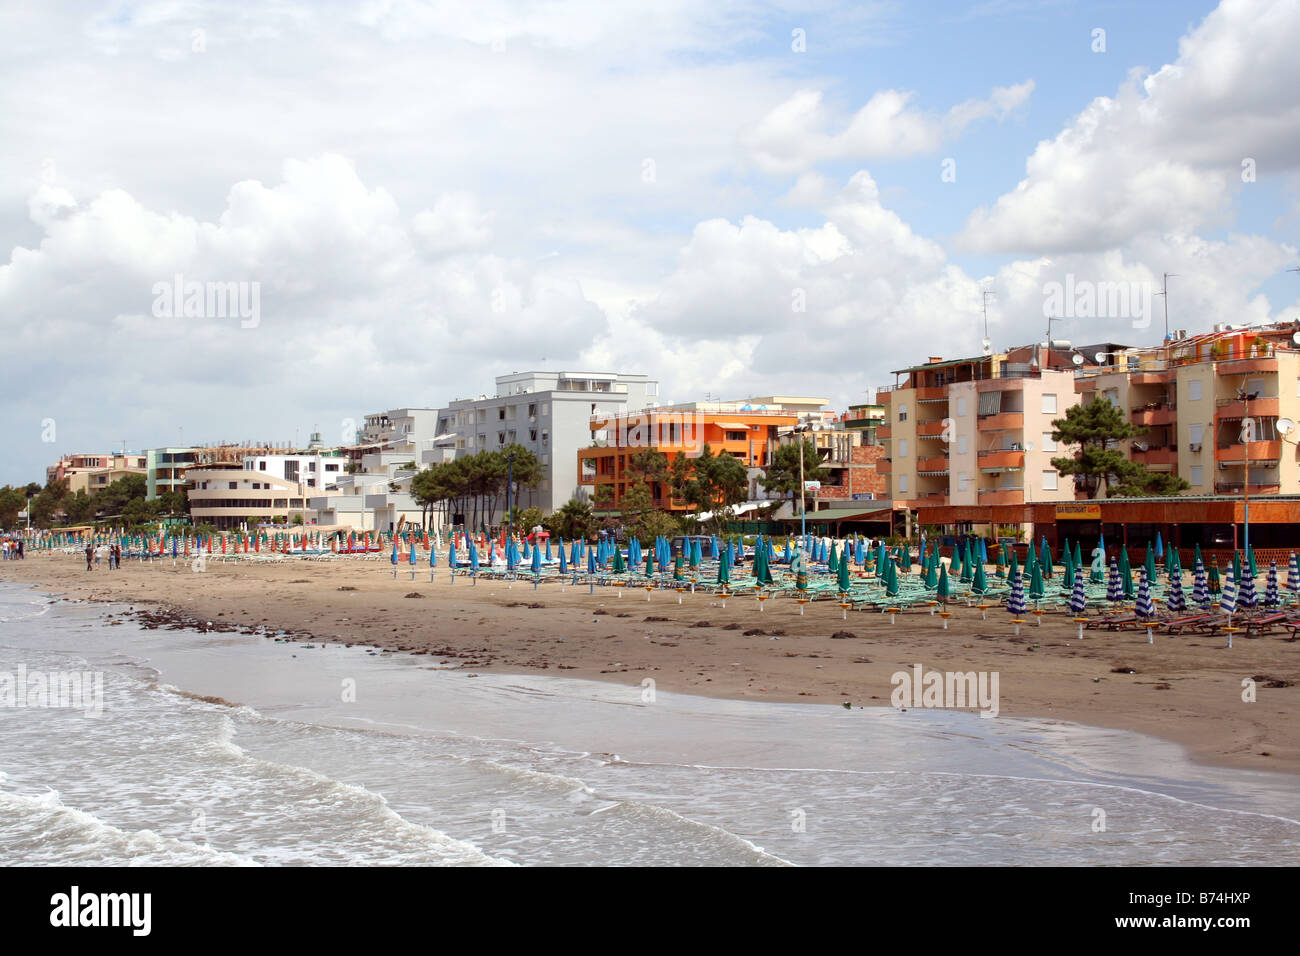 Beach and Hotels in Albanian Resort City of Durres/Durresi, Albania Stock Photo